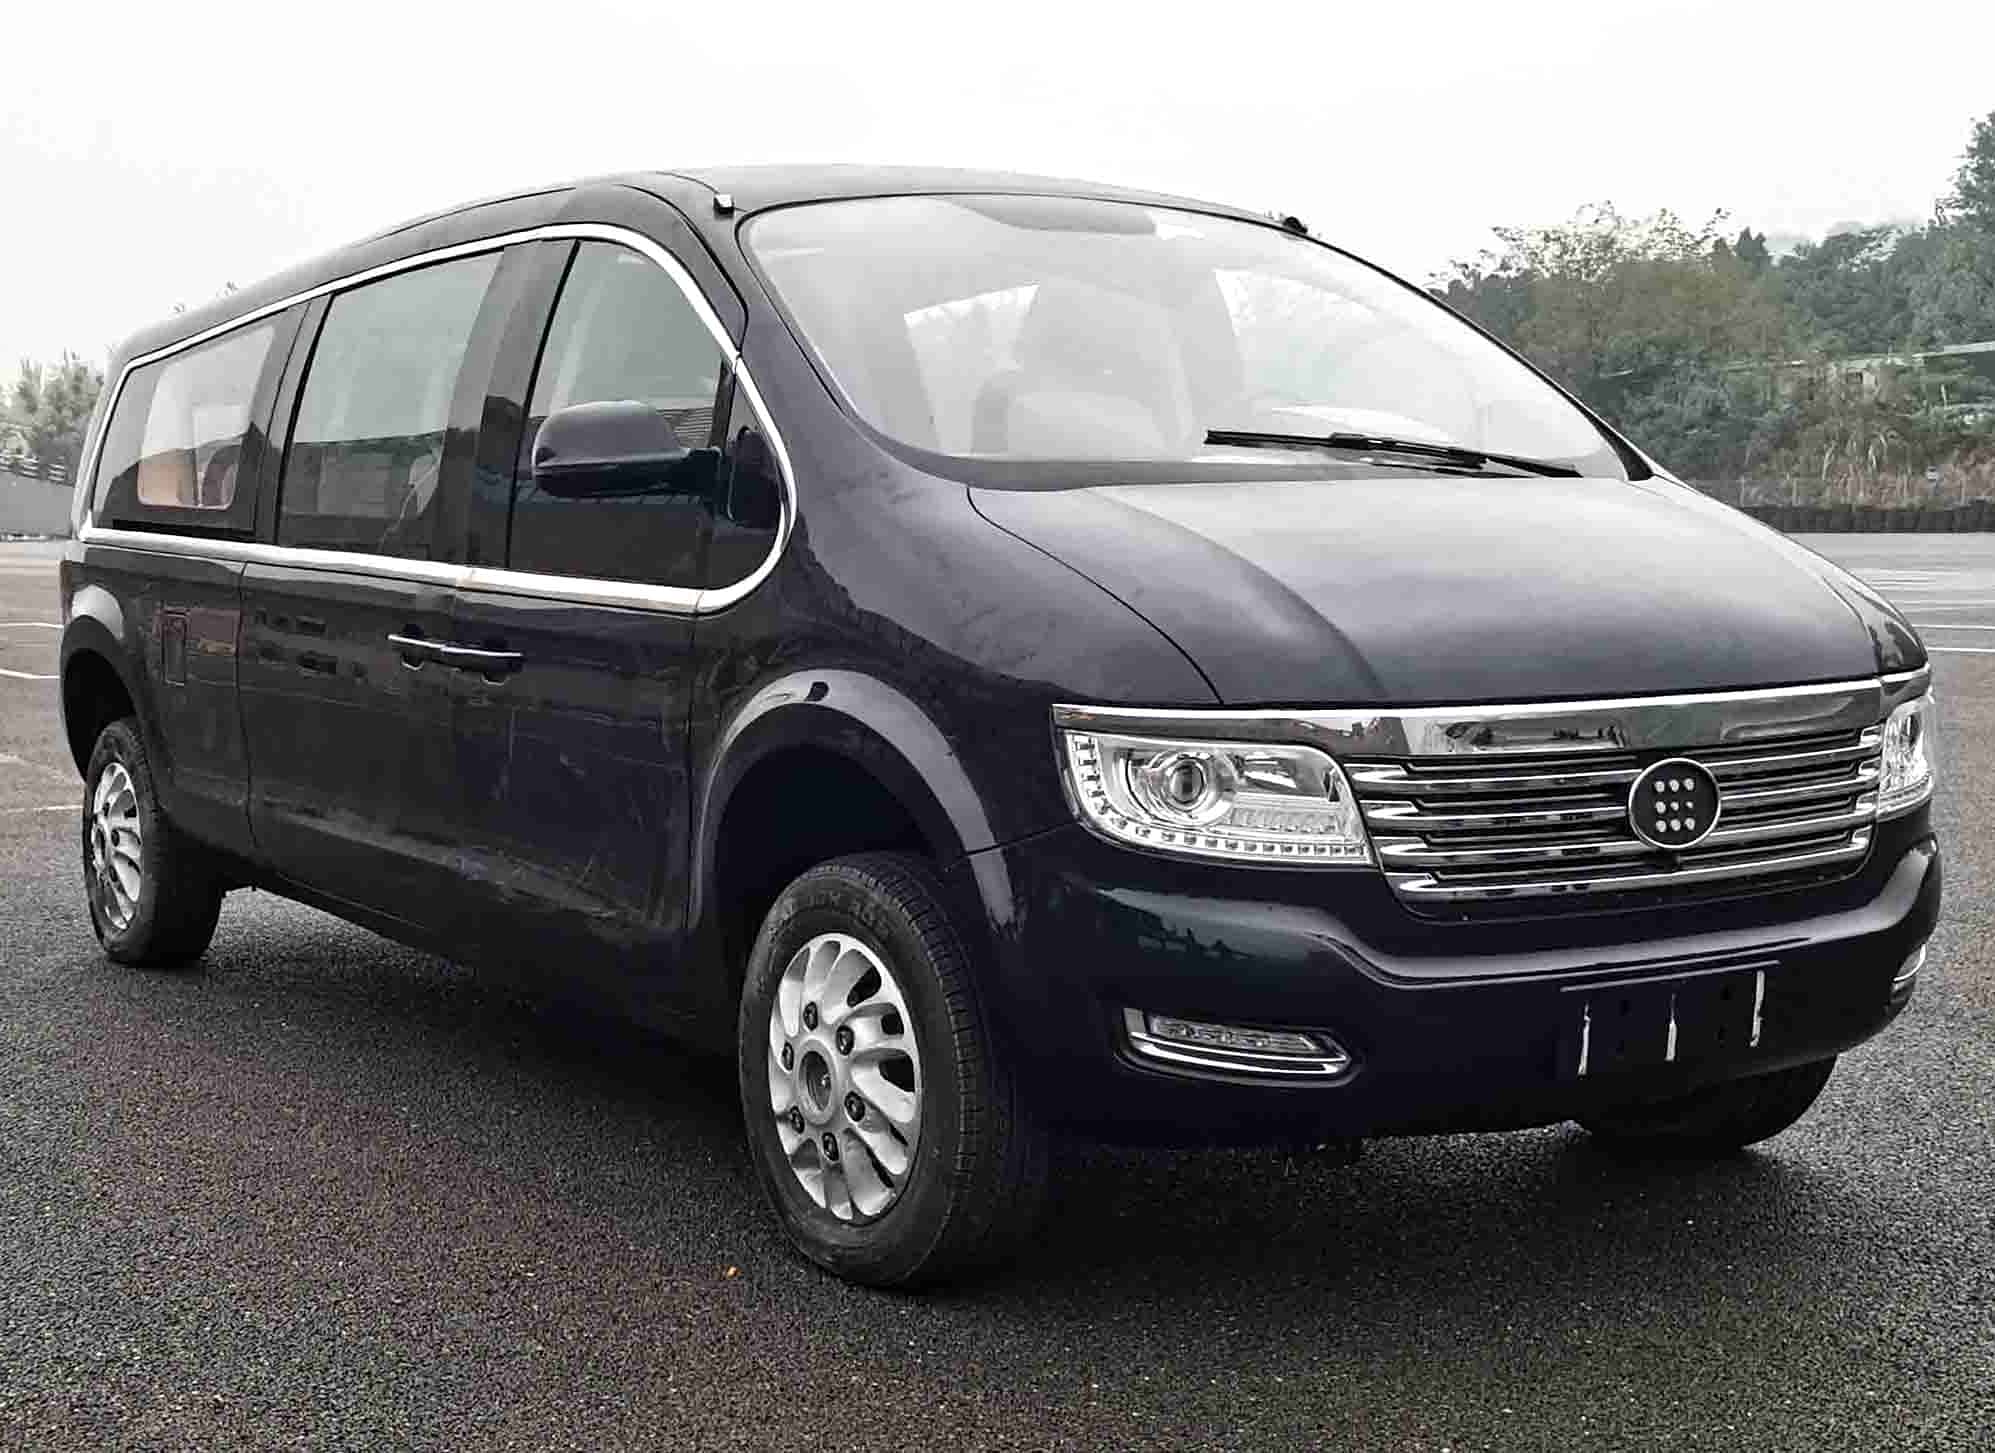 Dongfeng Fengon Dexian T8 Is An Interesting Chinese Electric MPV